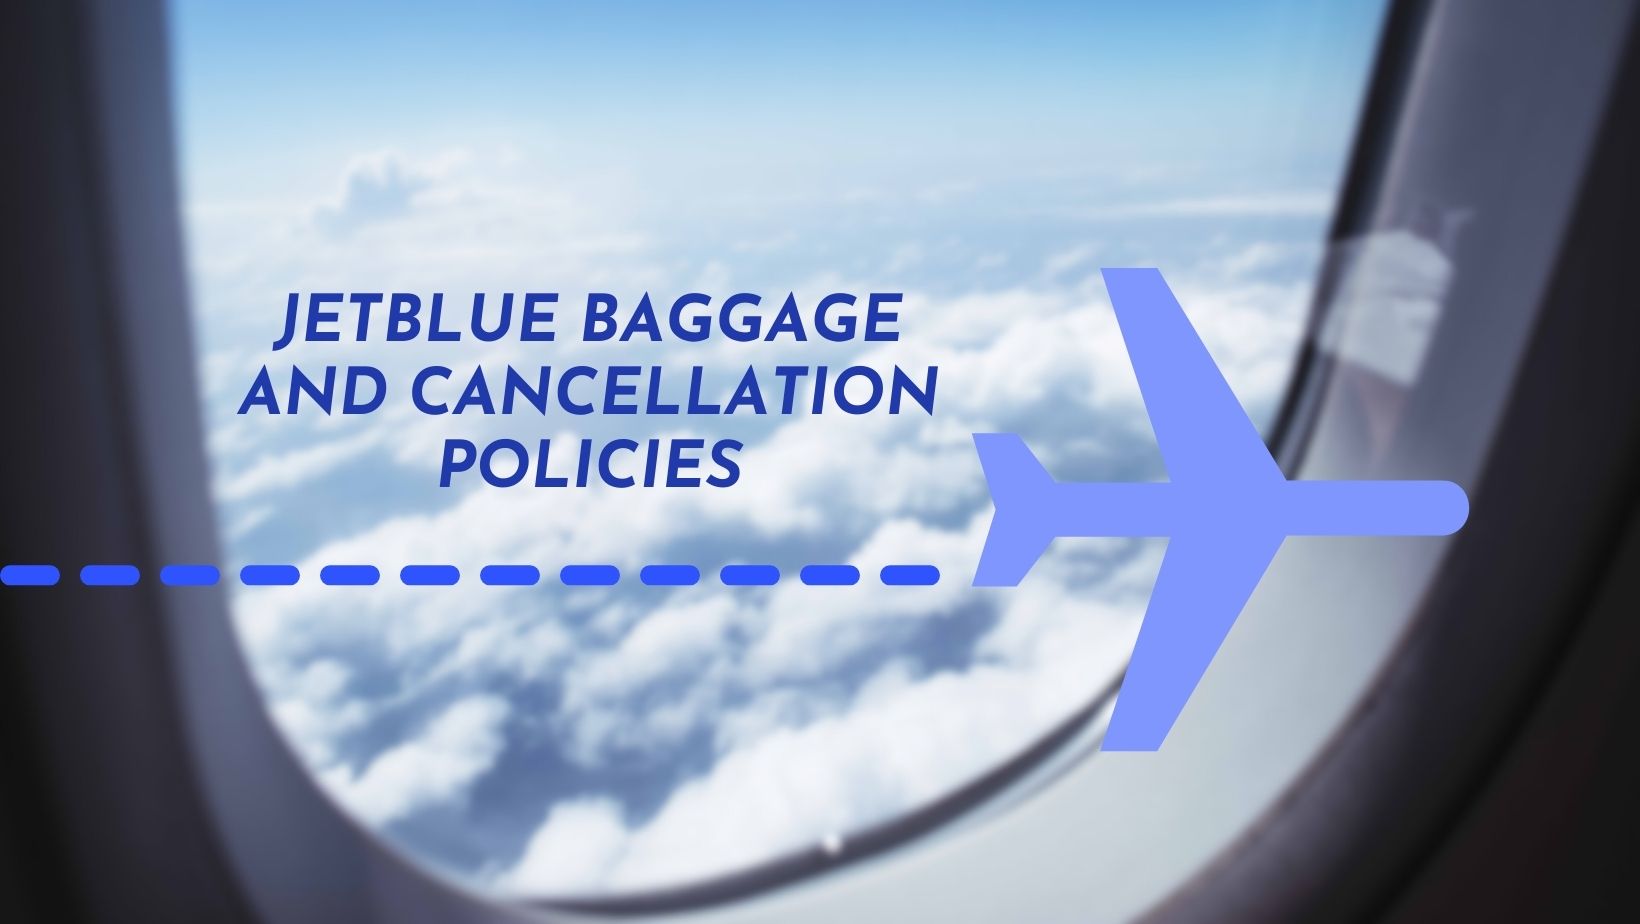 JetBlue Baggage and Cancellation Policies